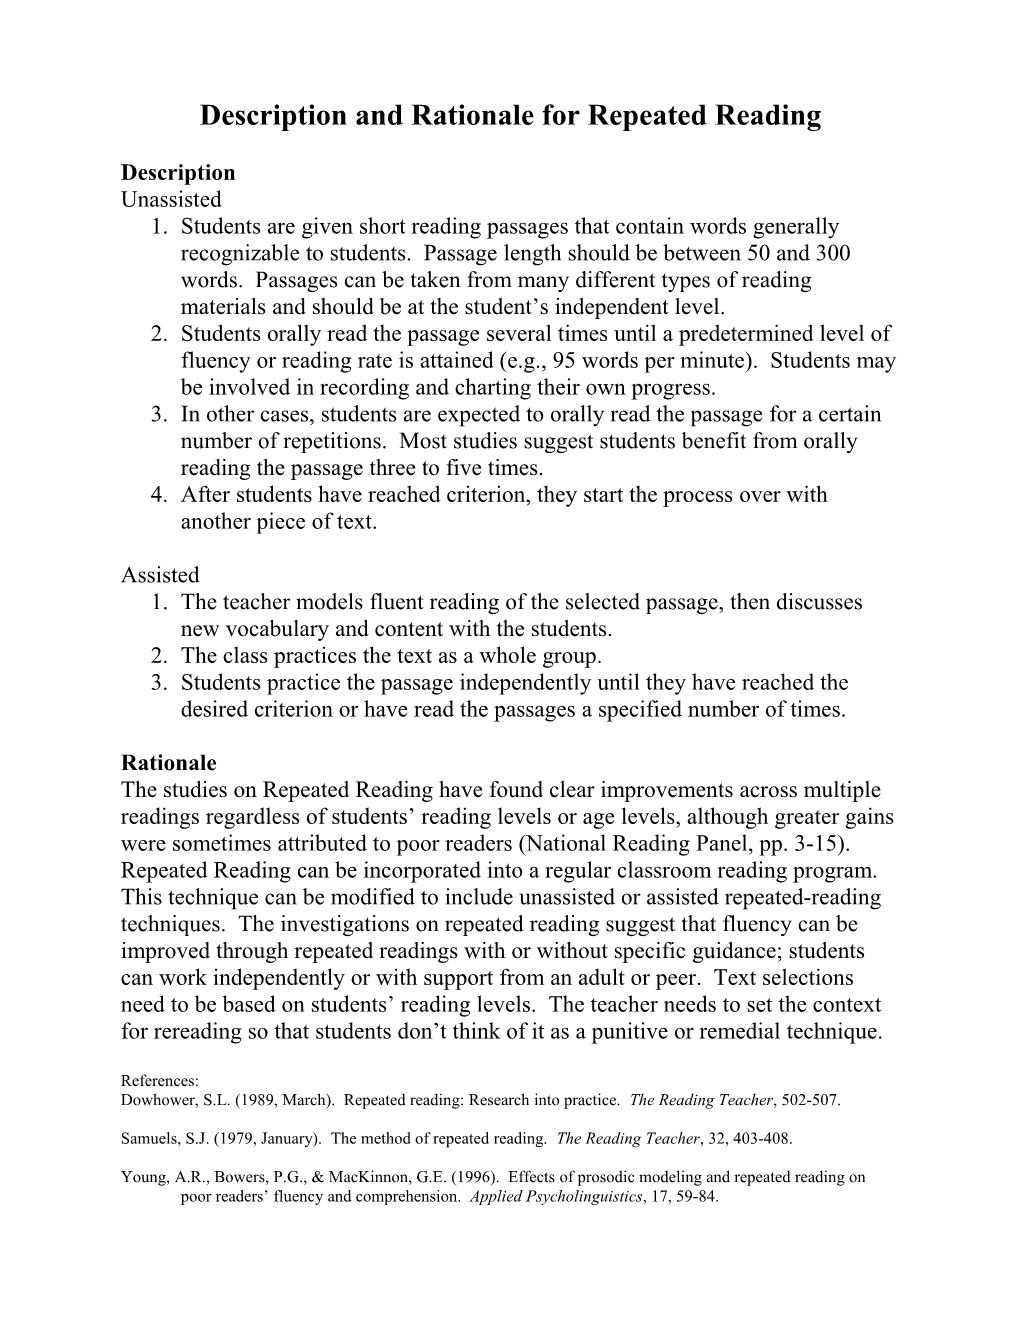 Description and Rationale for Repeated Reading